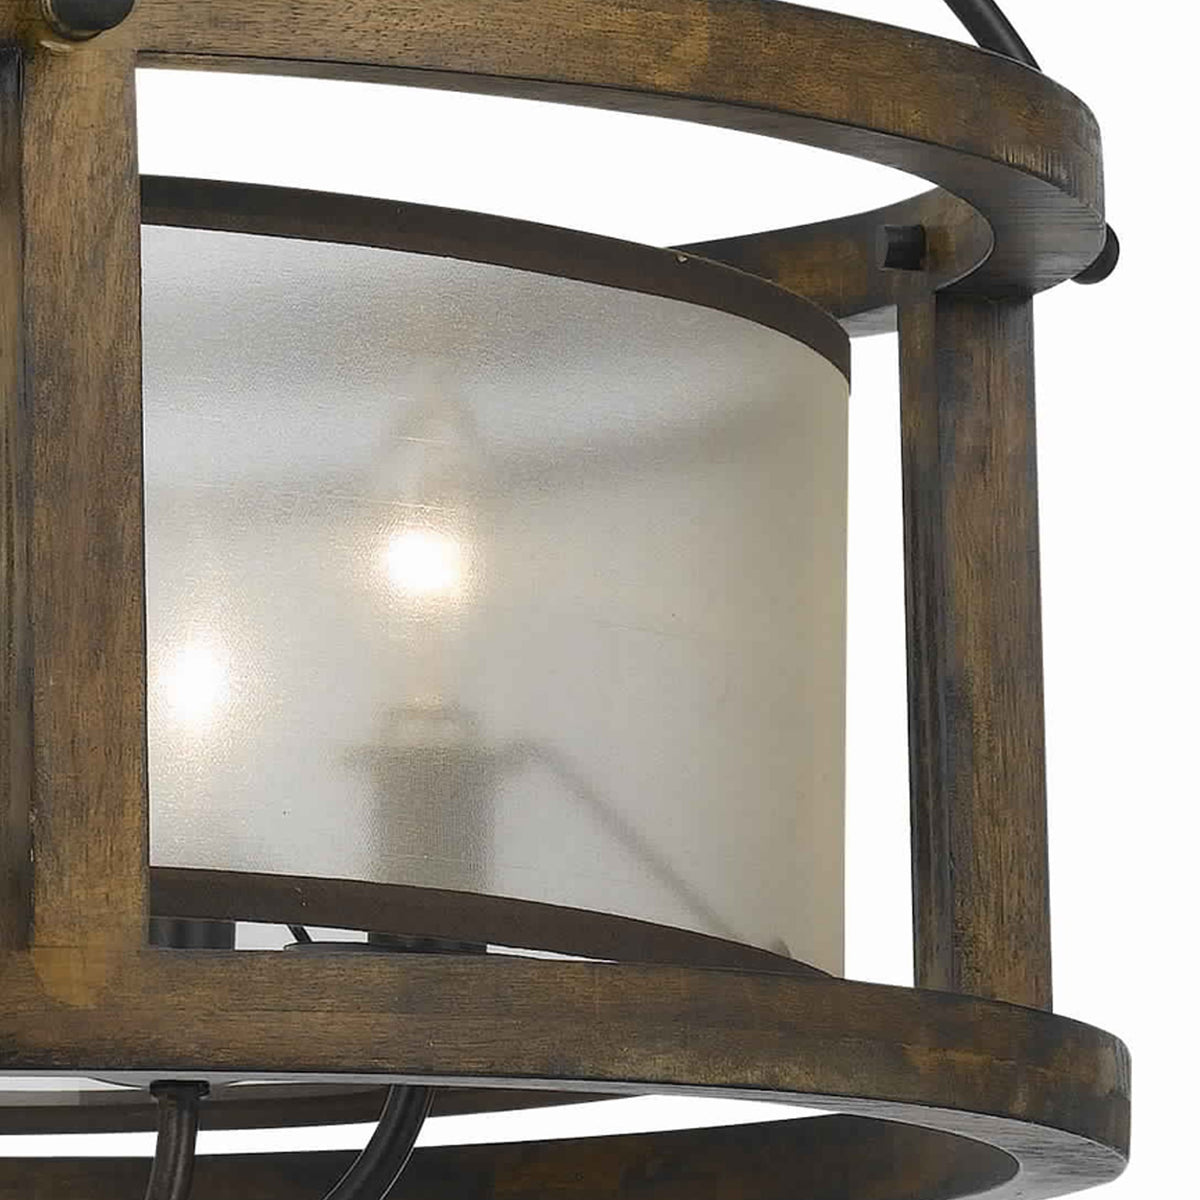 5 Bulb Round Chandelier with Wooden Frame and Organza Striped Shade, Brown - BM223597